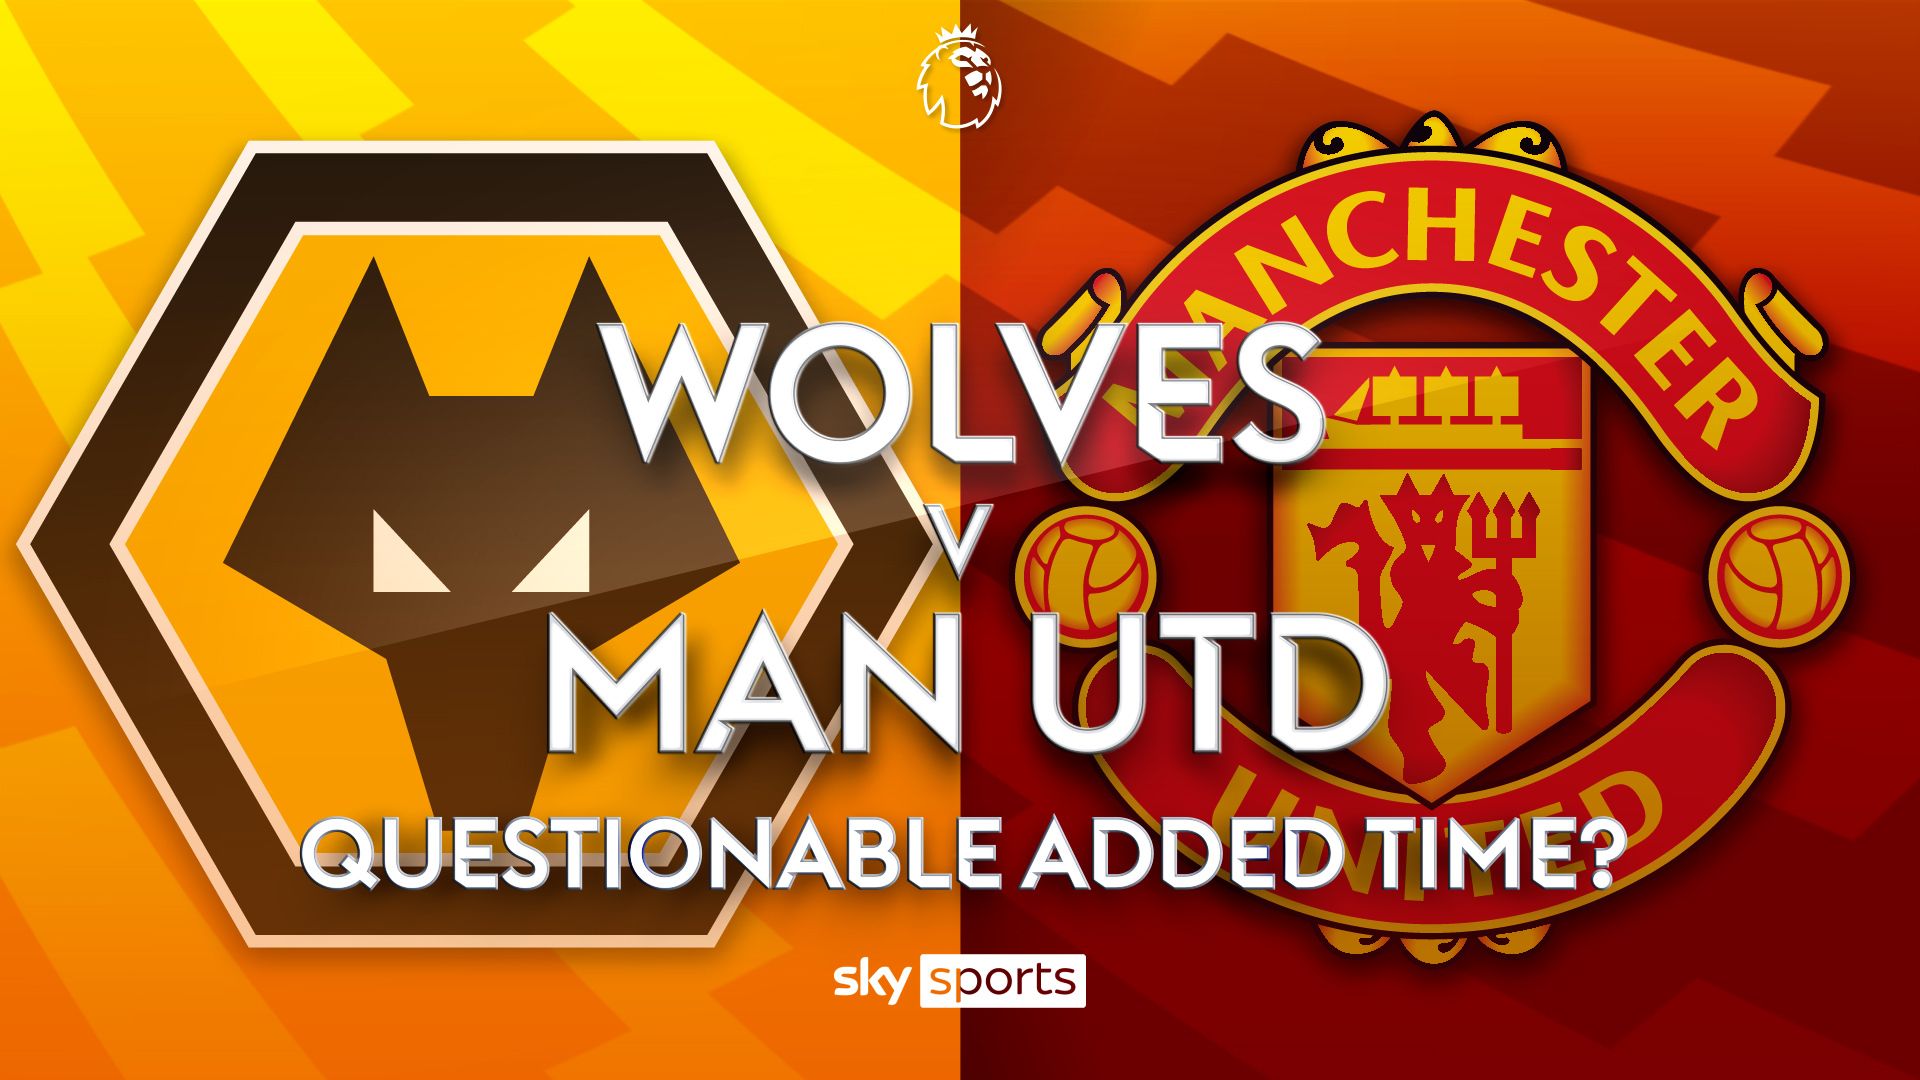 Wolves vs Man Utd: Nearly 7 mins of stoppages, but only 5 mins added on